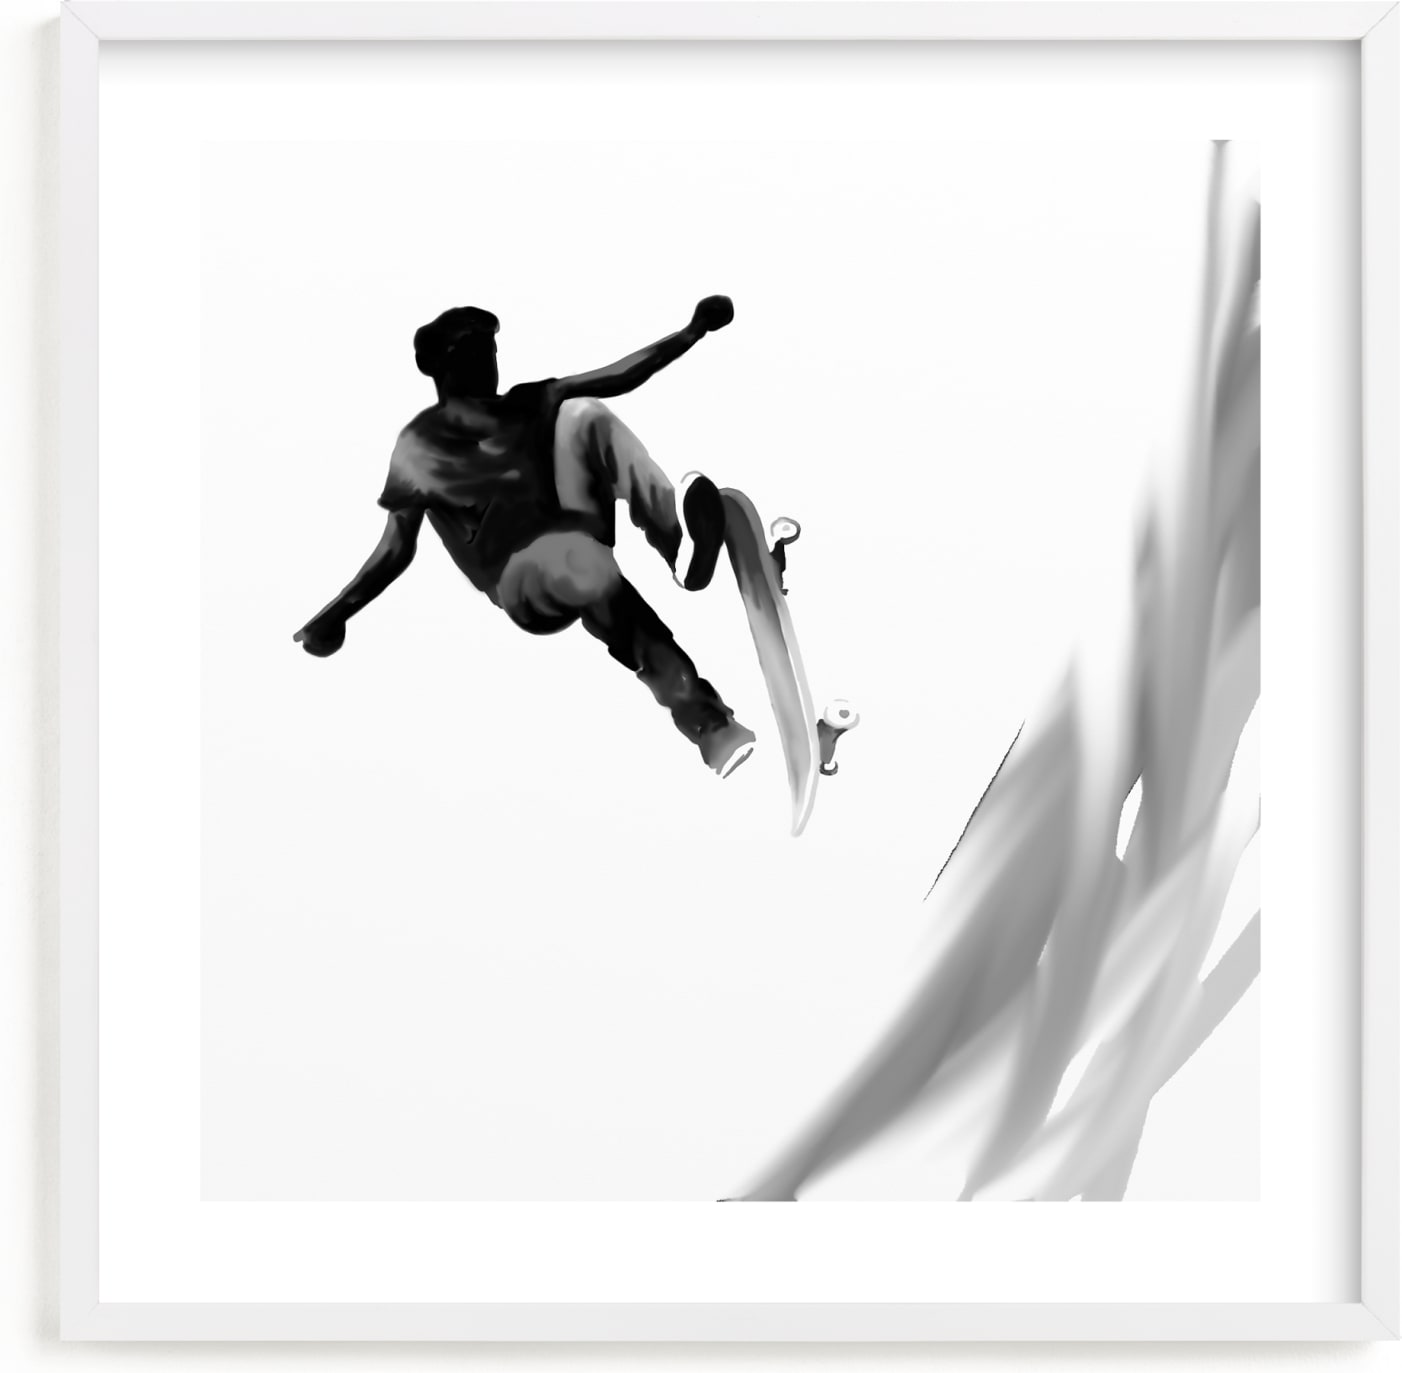 This is a black and white kids wall art by Amy Hall called Skate 2.